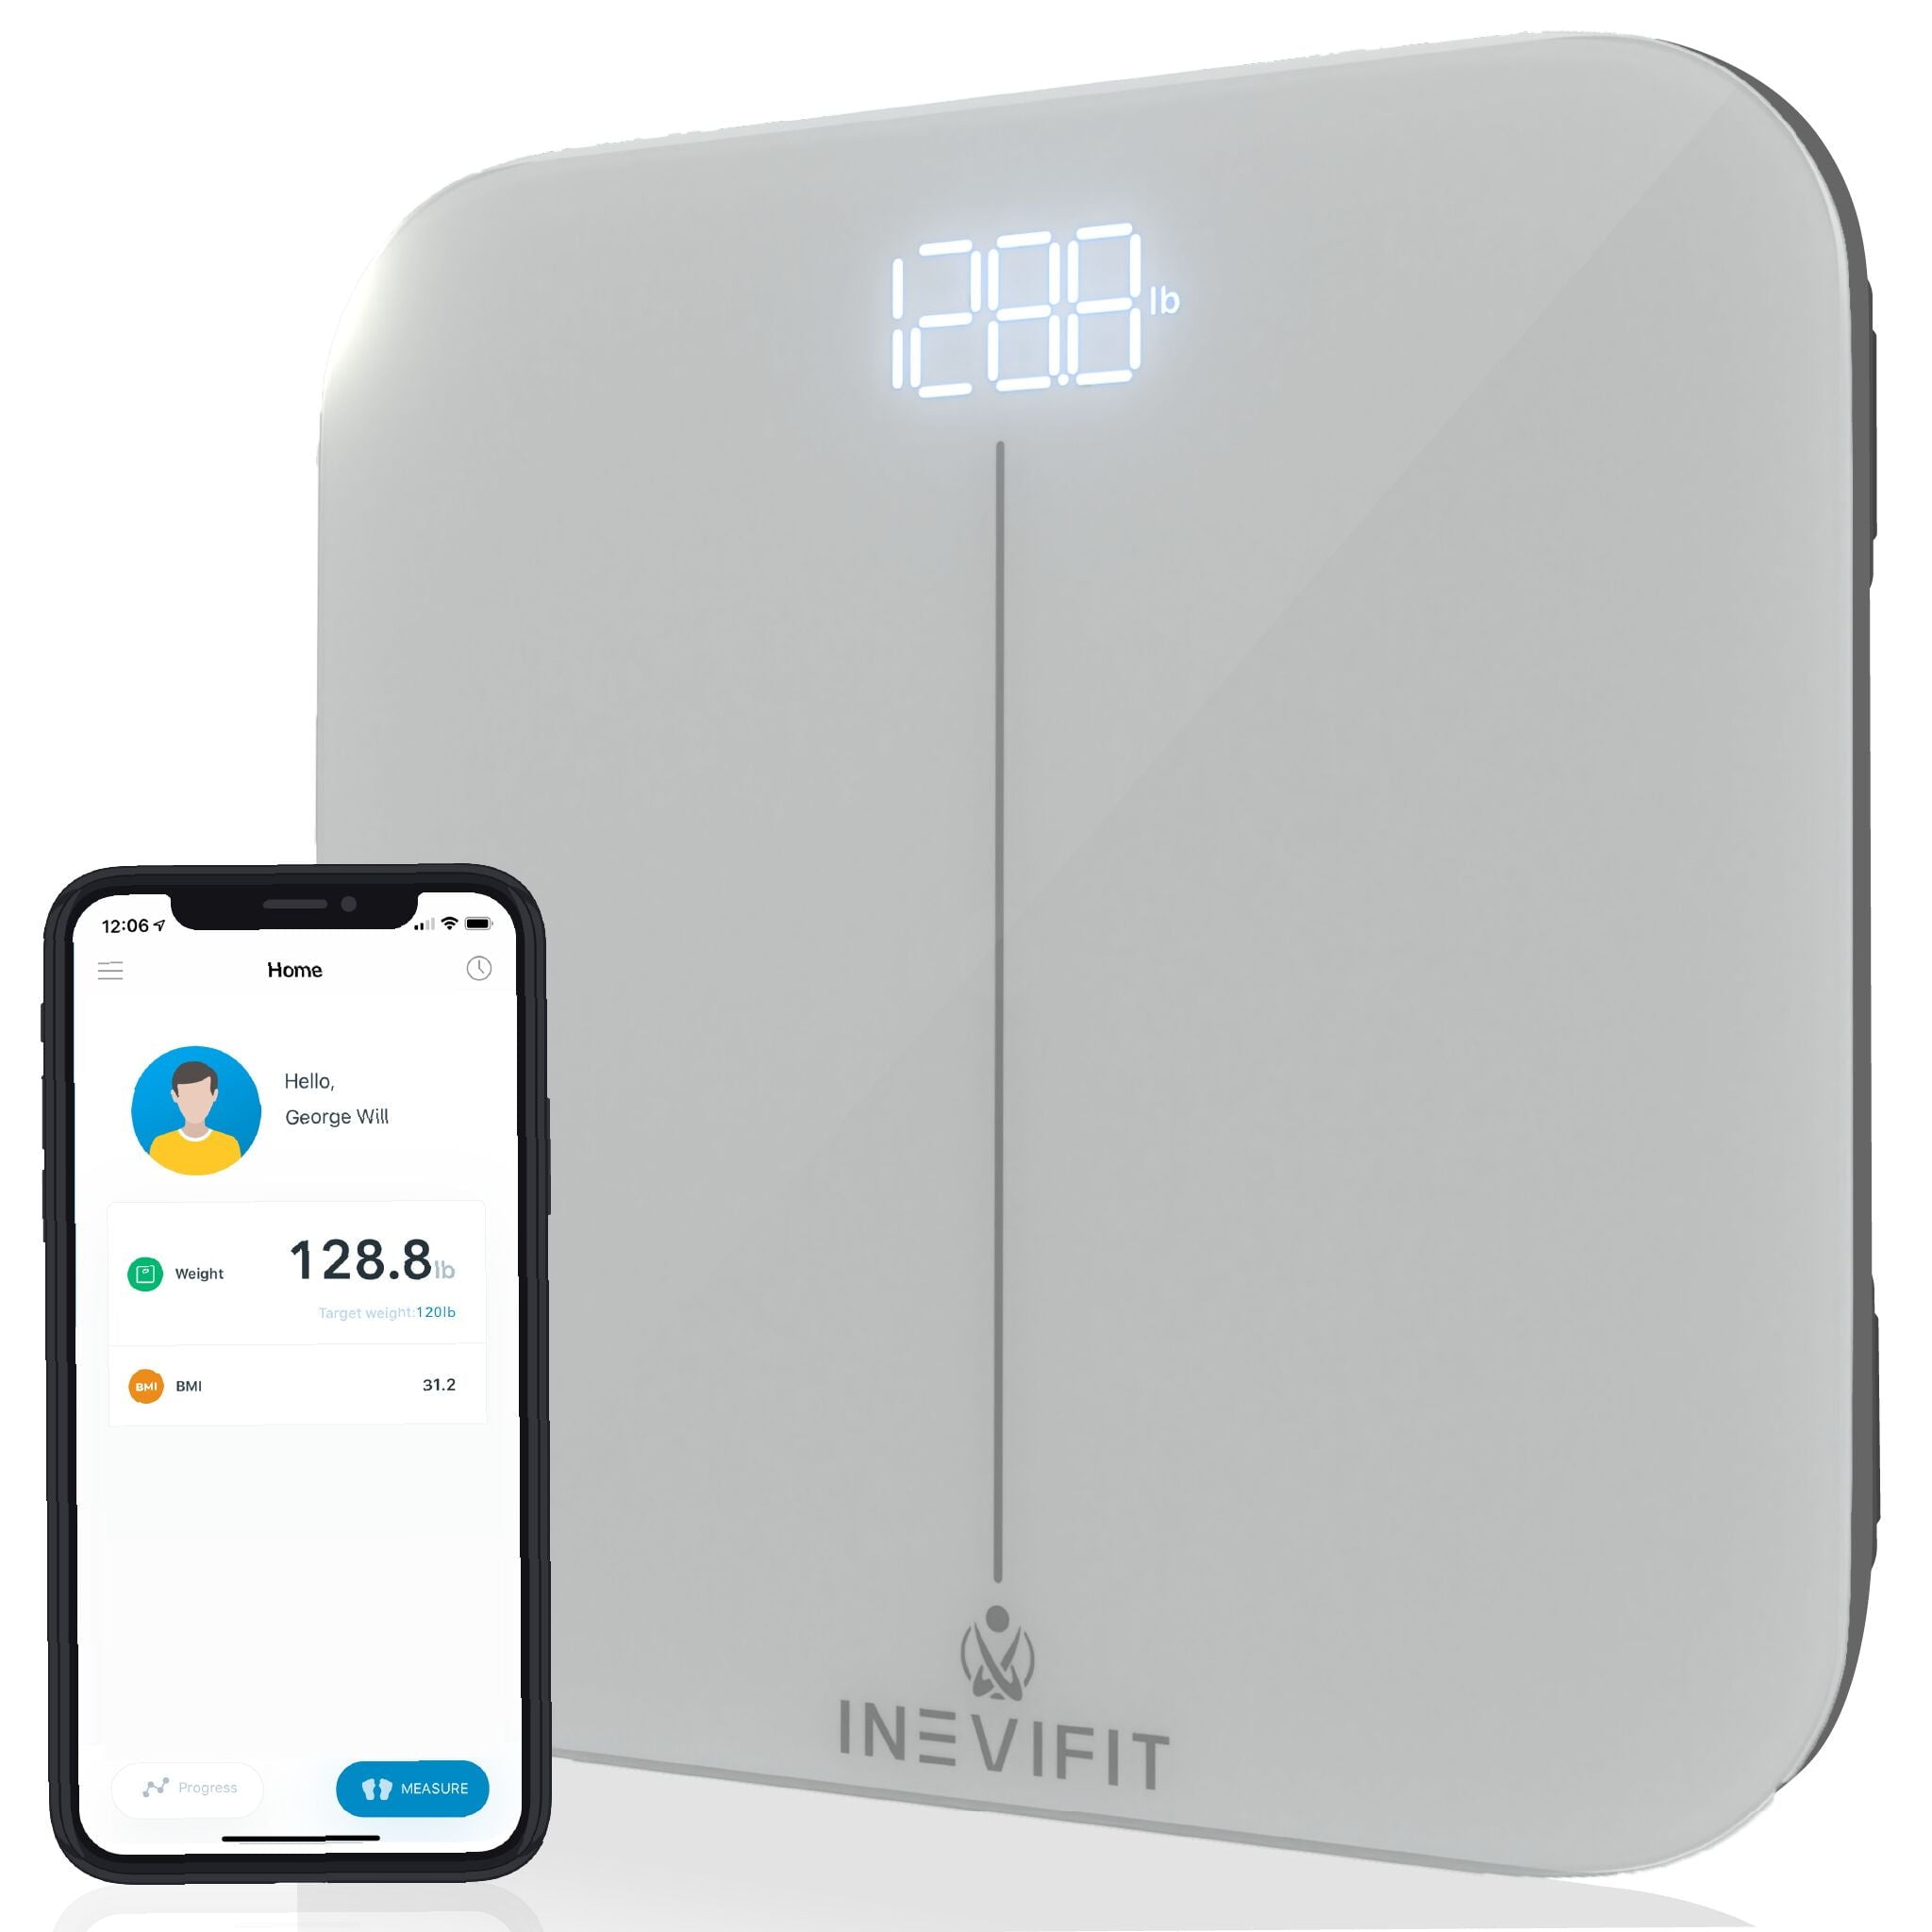 INEVIFIT Bathroom Scale, Highly Accurate Digital Bathroom Body Scale,  Measures Weight up to 400 lbs. Includes a 5-Year Warranty - White